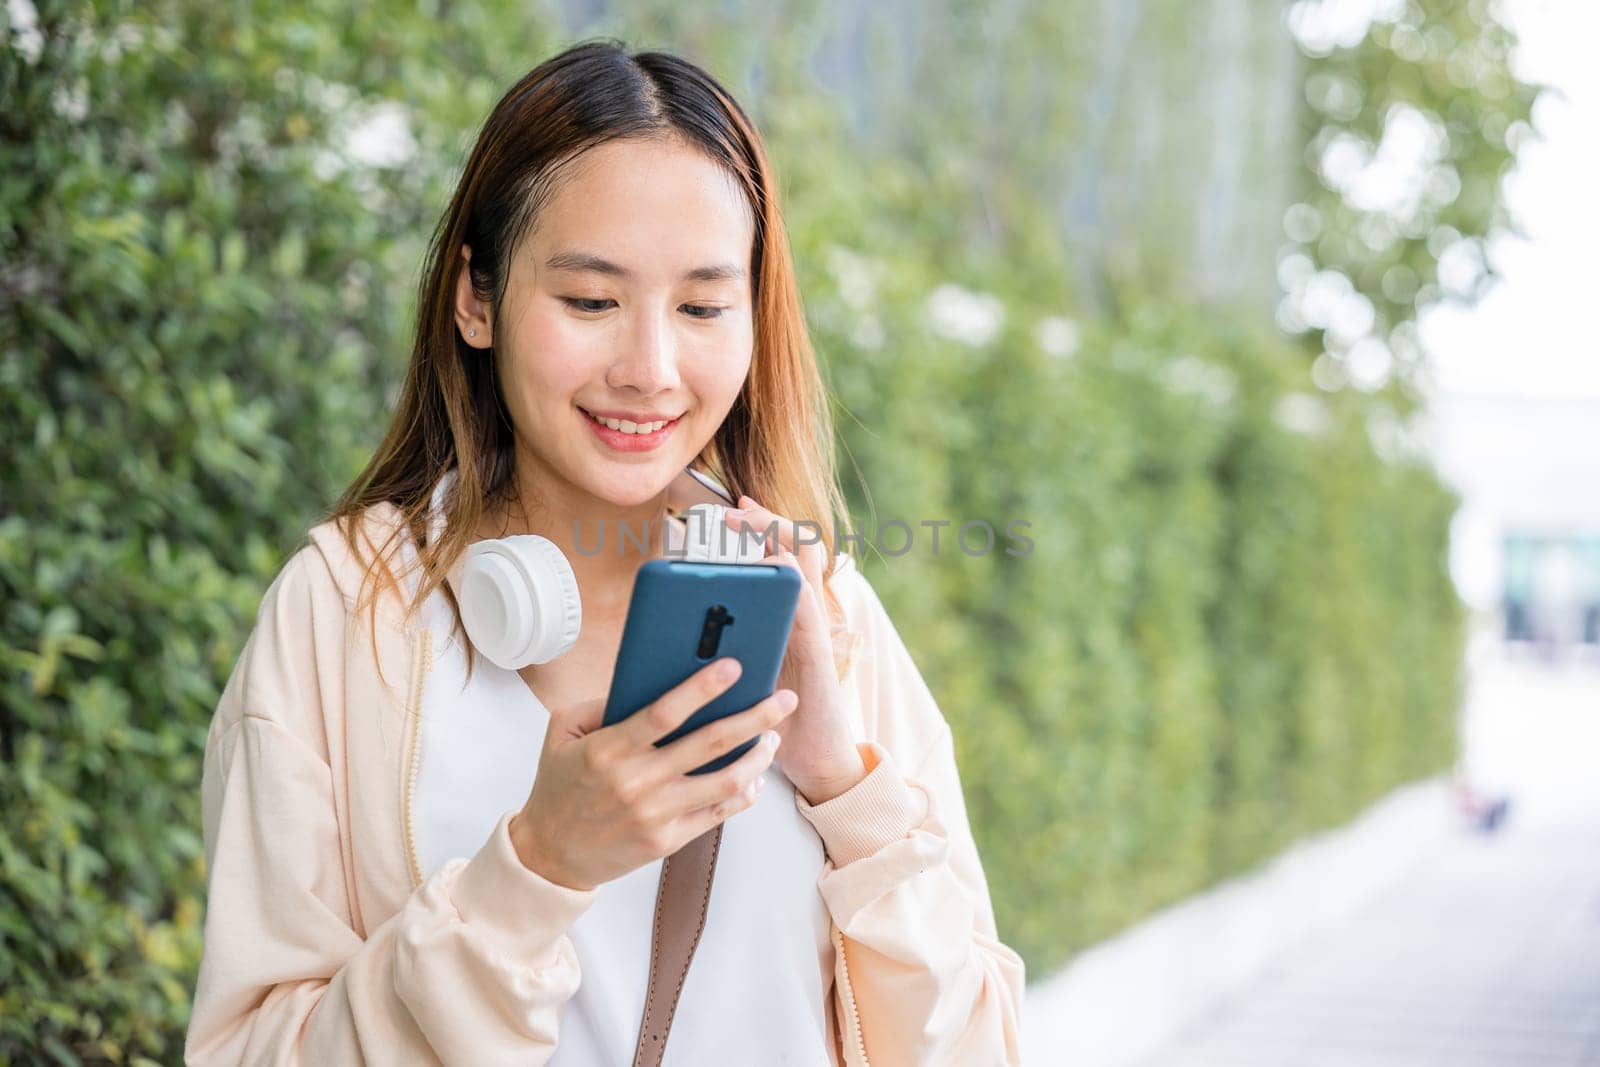 Amidst the beauty of an urban city garden a relaxed young woman uses wireless headphones to choose and listen to her favorite music. Her joyful dance in bright season adds to the vibrant atmosphere. by Sorapop